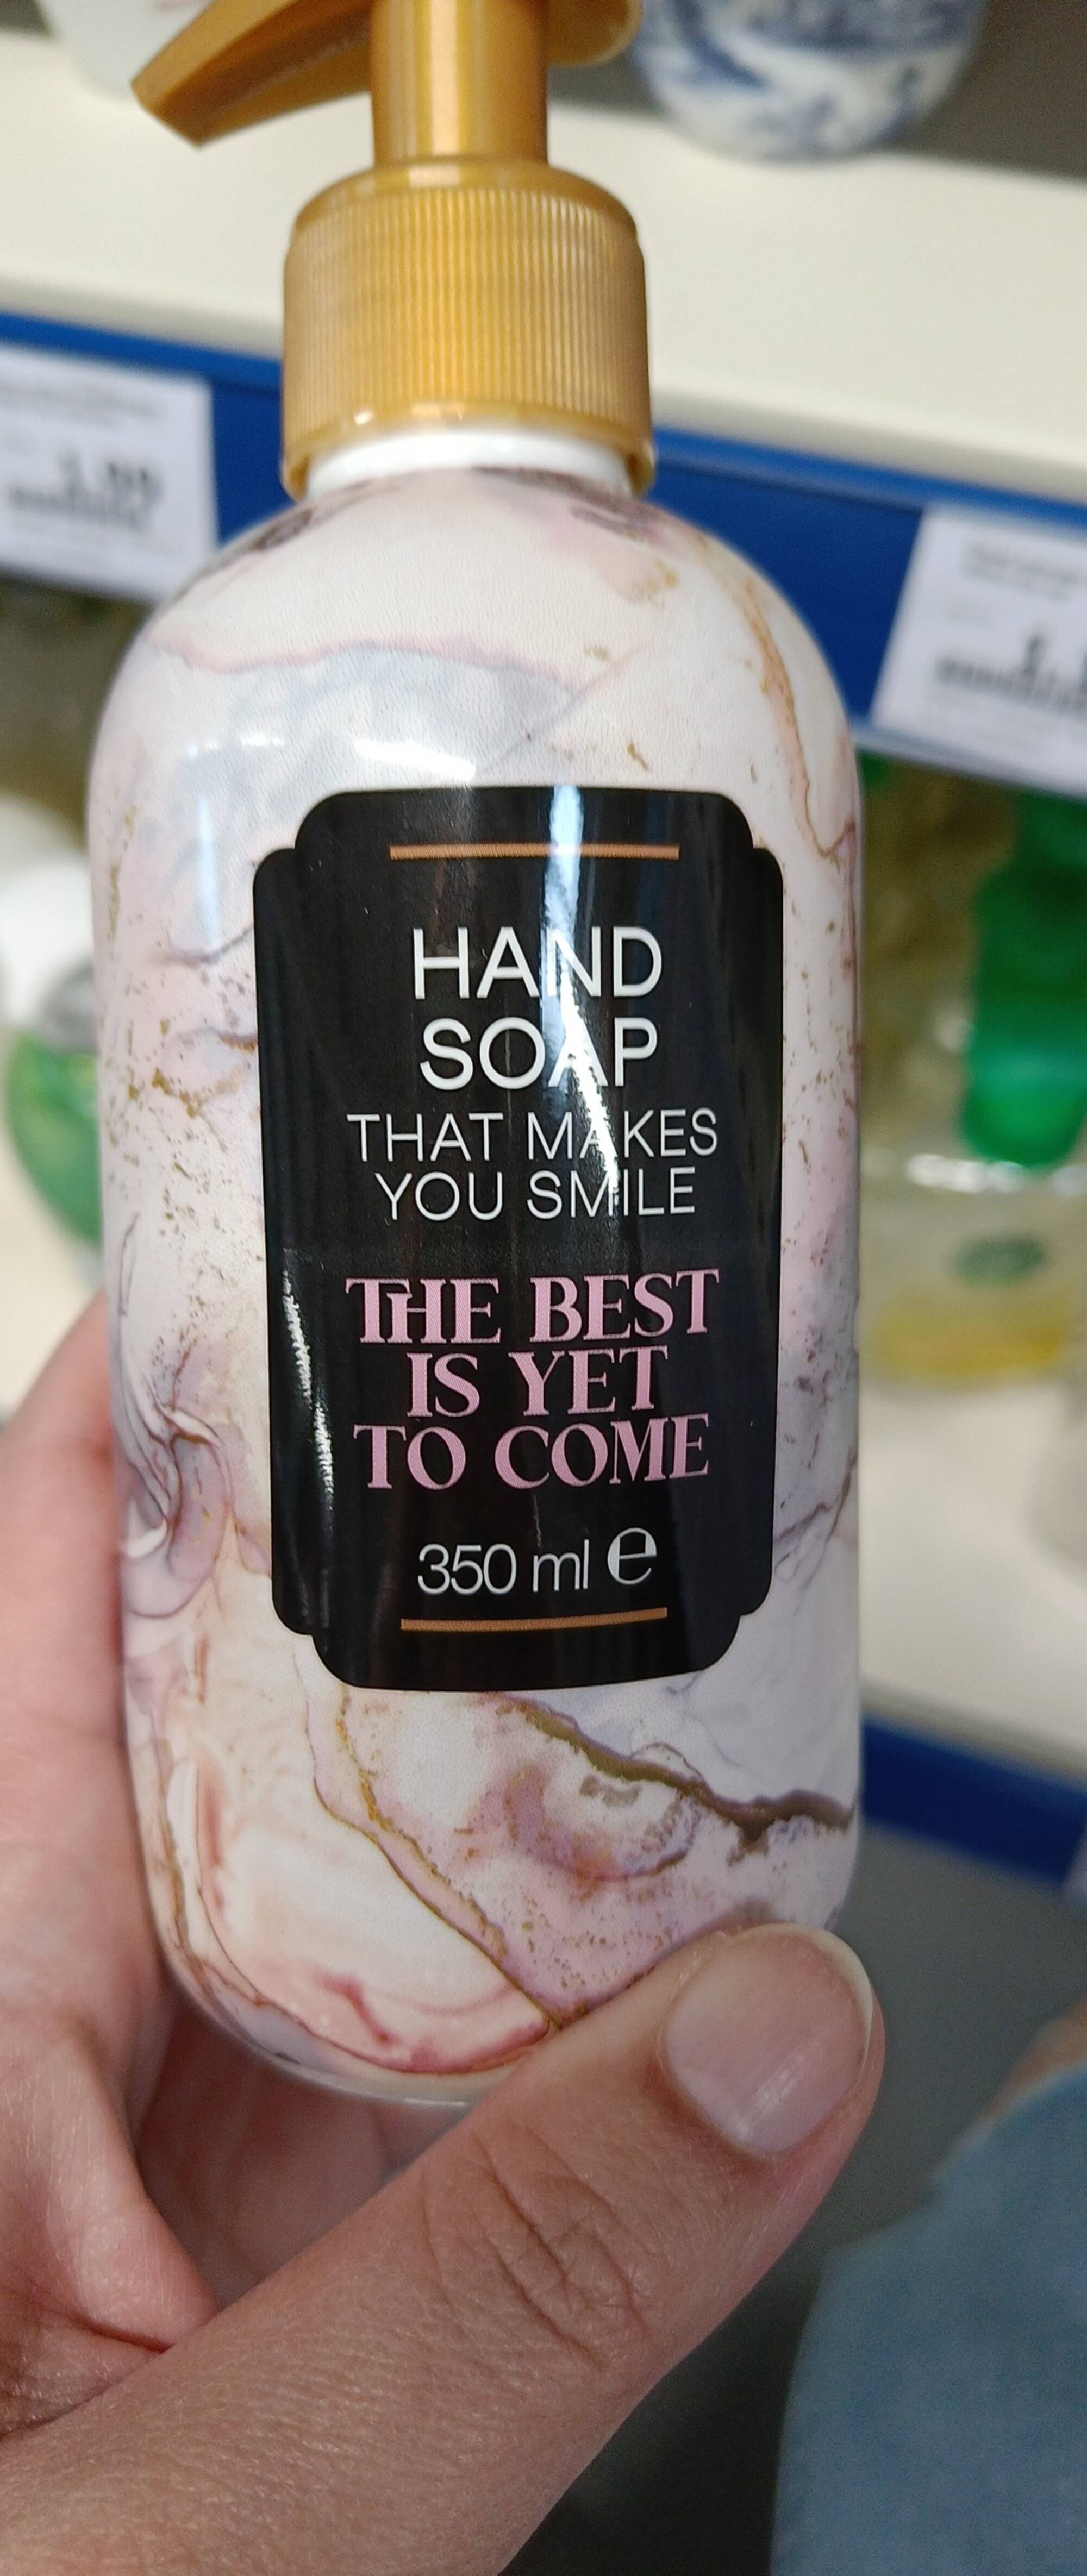 MAXBRANDS - The best is yet to come - Hand soap